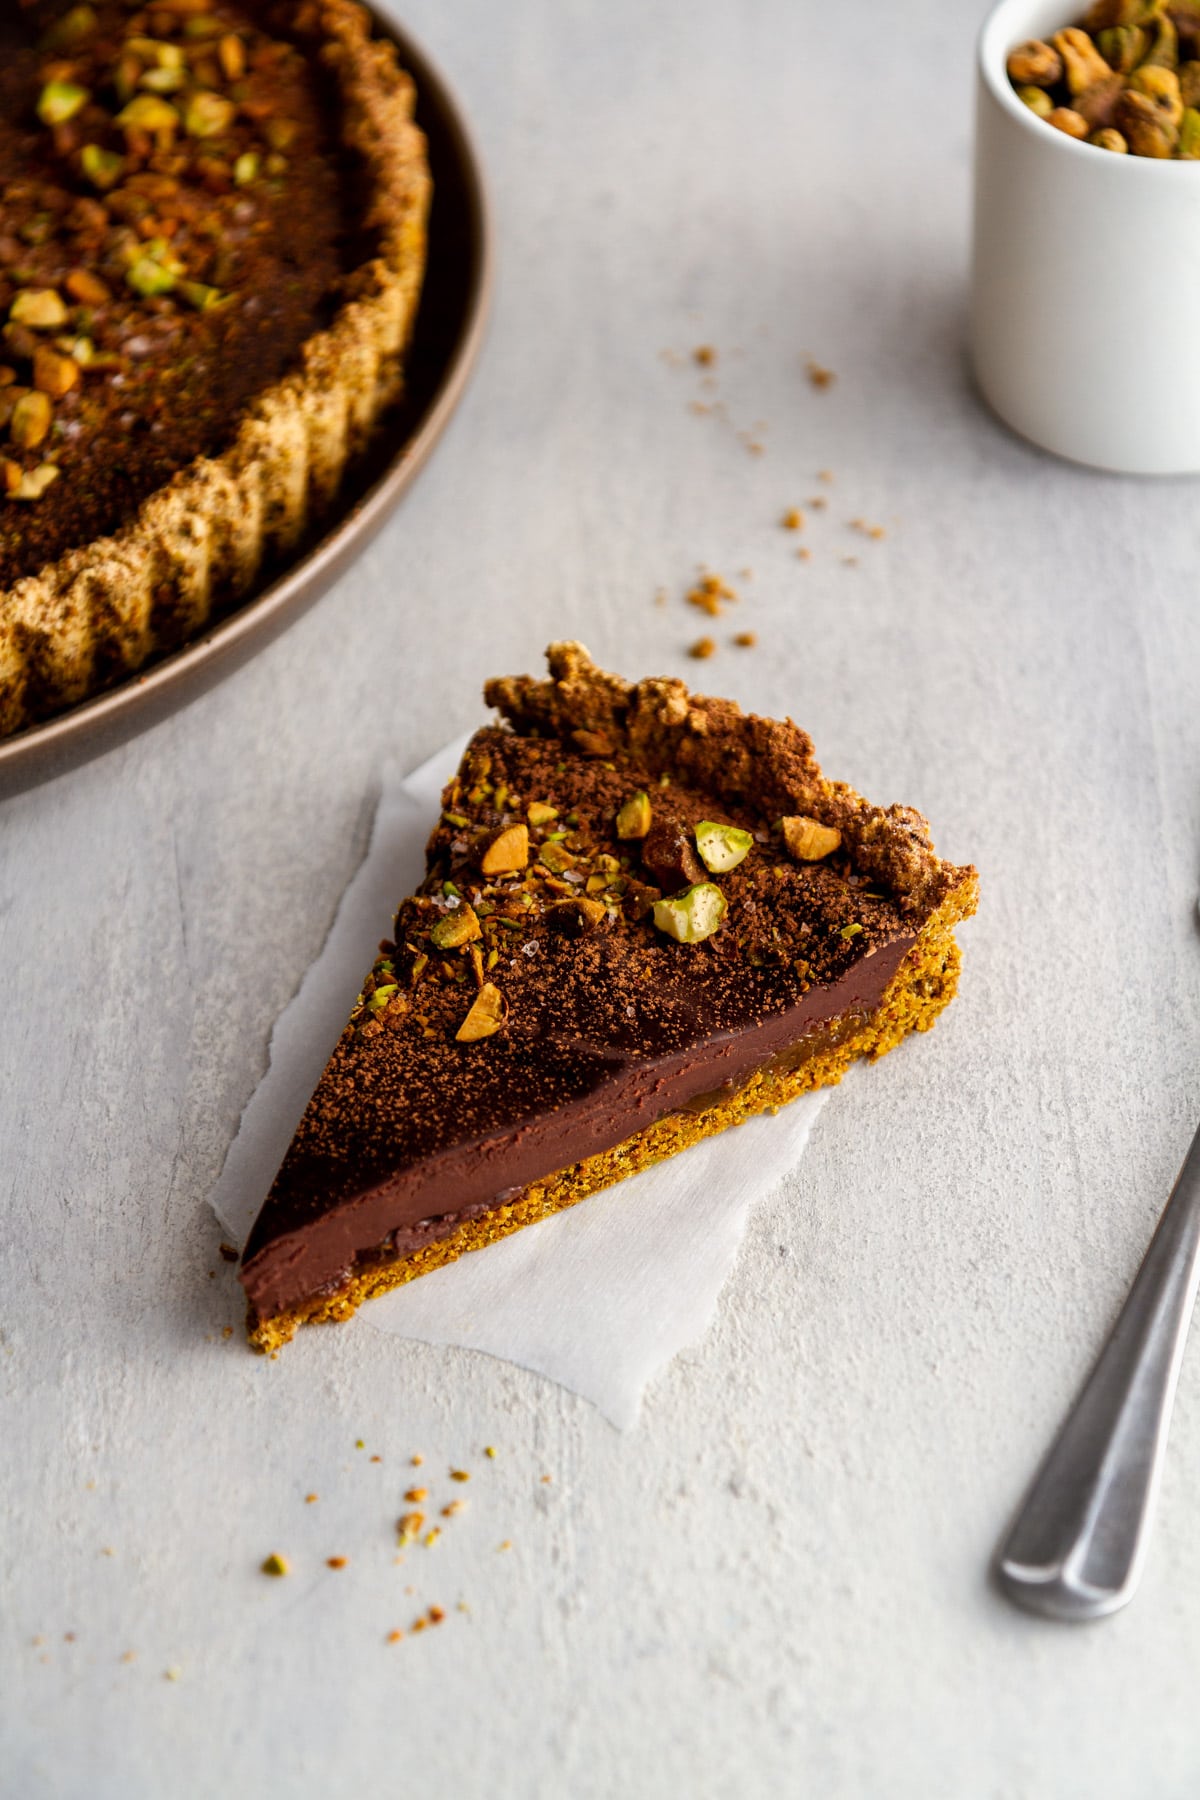 a slice of a chocolate tart on a surface